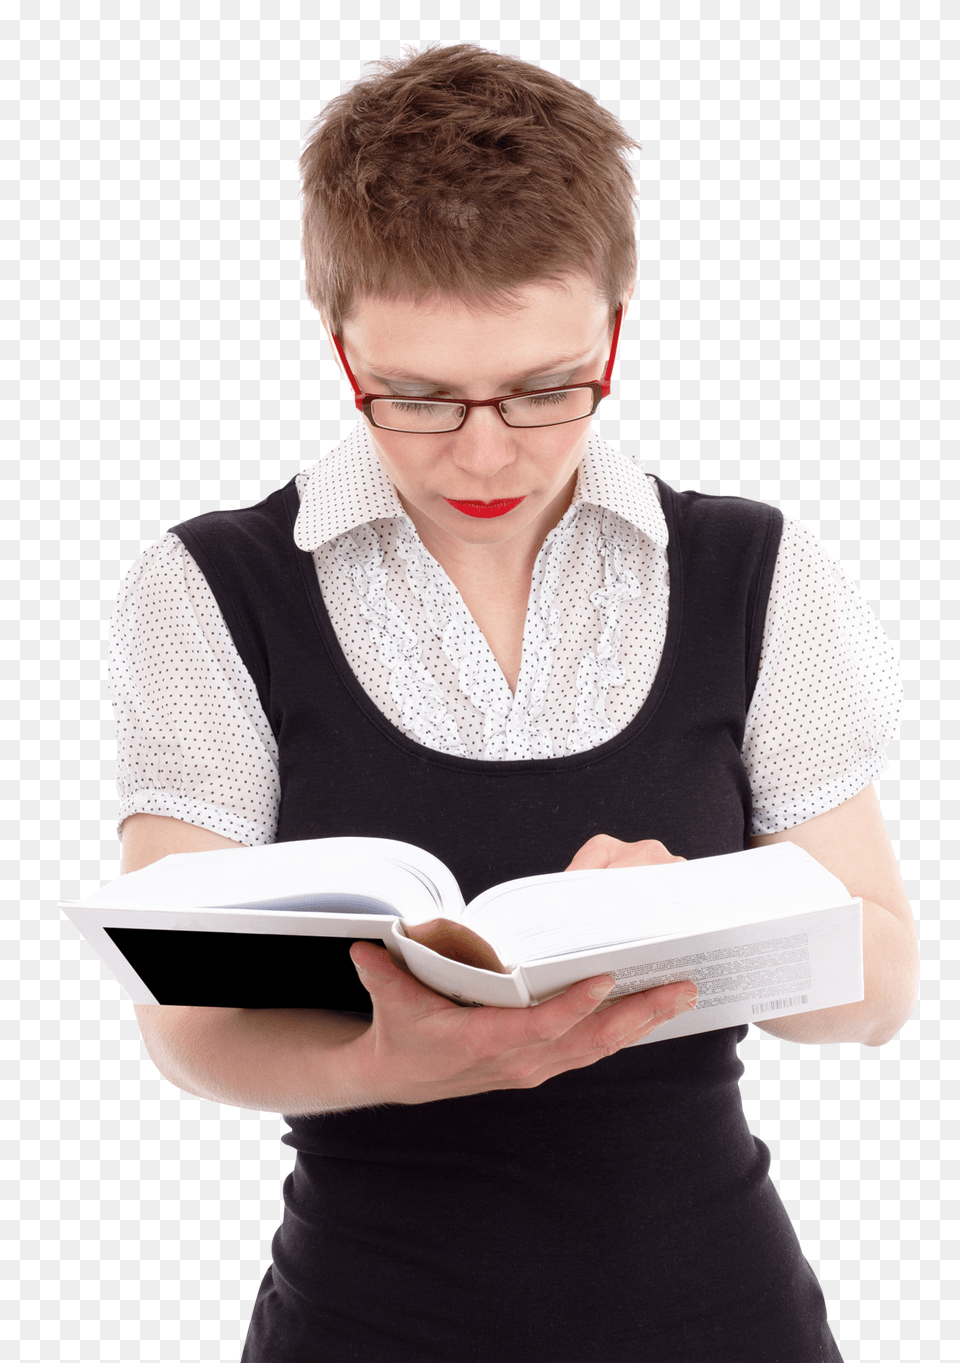 Pngpix Com Young Woman Reading Book Transparent, Person, Adult, Female, Face Png Image